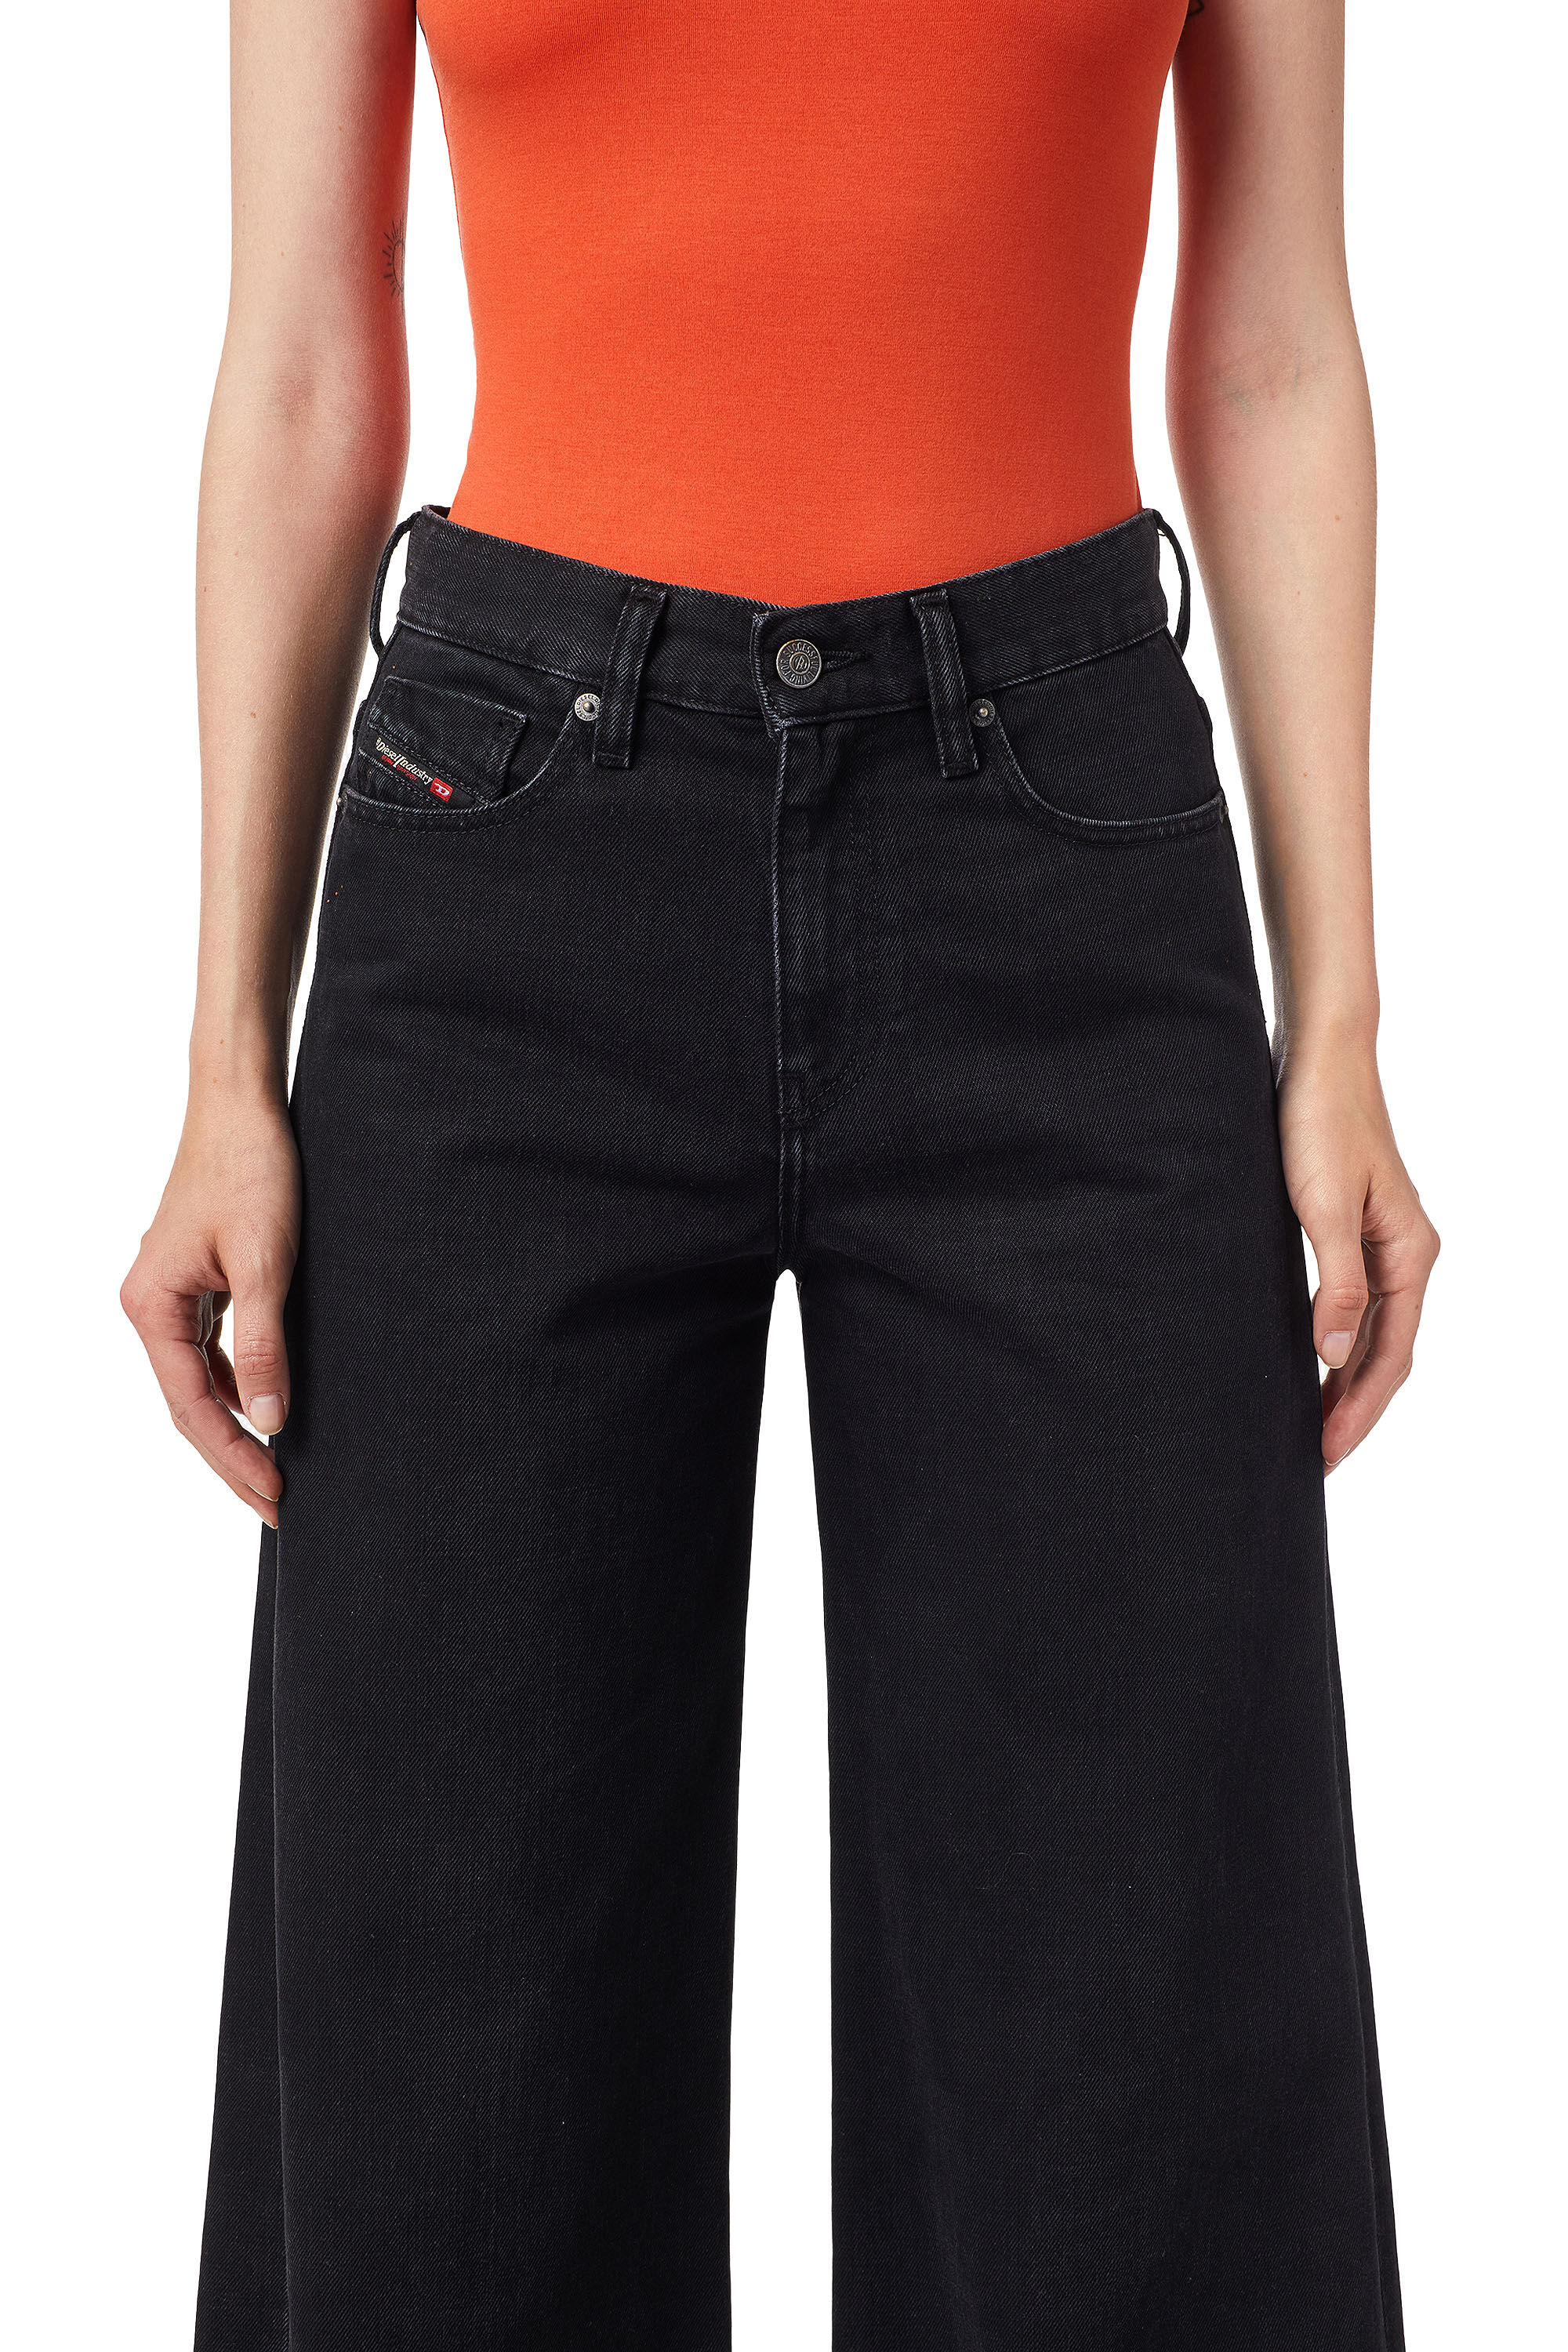 Diesel - D-Akemi Z09RL Bootcut and Flare Jeans,  - Image 4